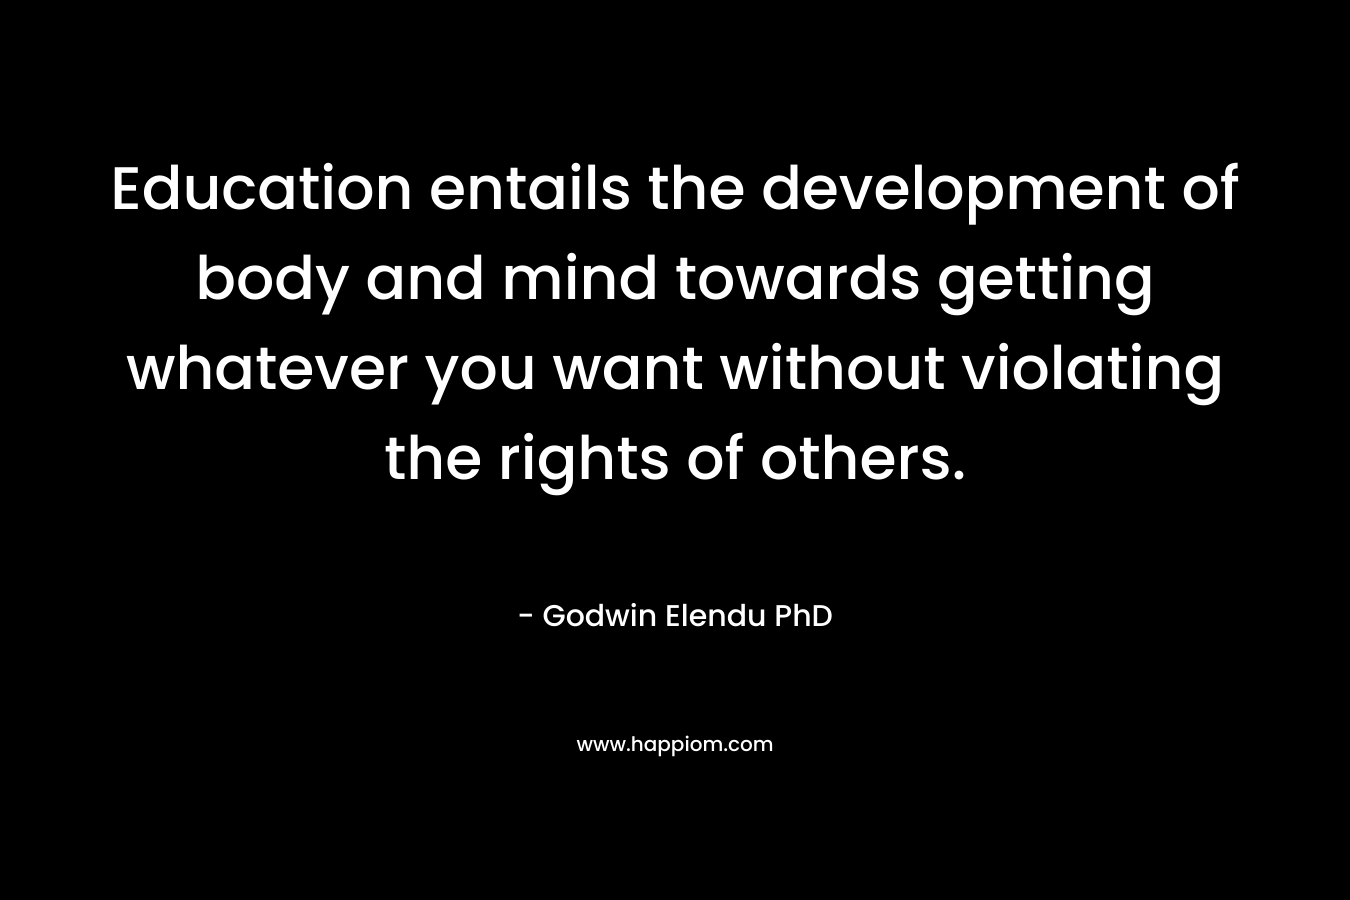 Education entails the development of body and mind towards getting whatever you want without violating the rights of others. – Godwin Elendu PhD